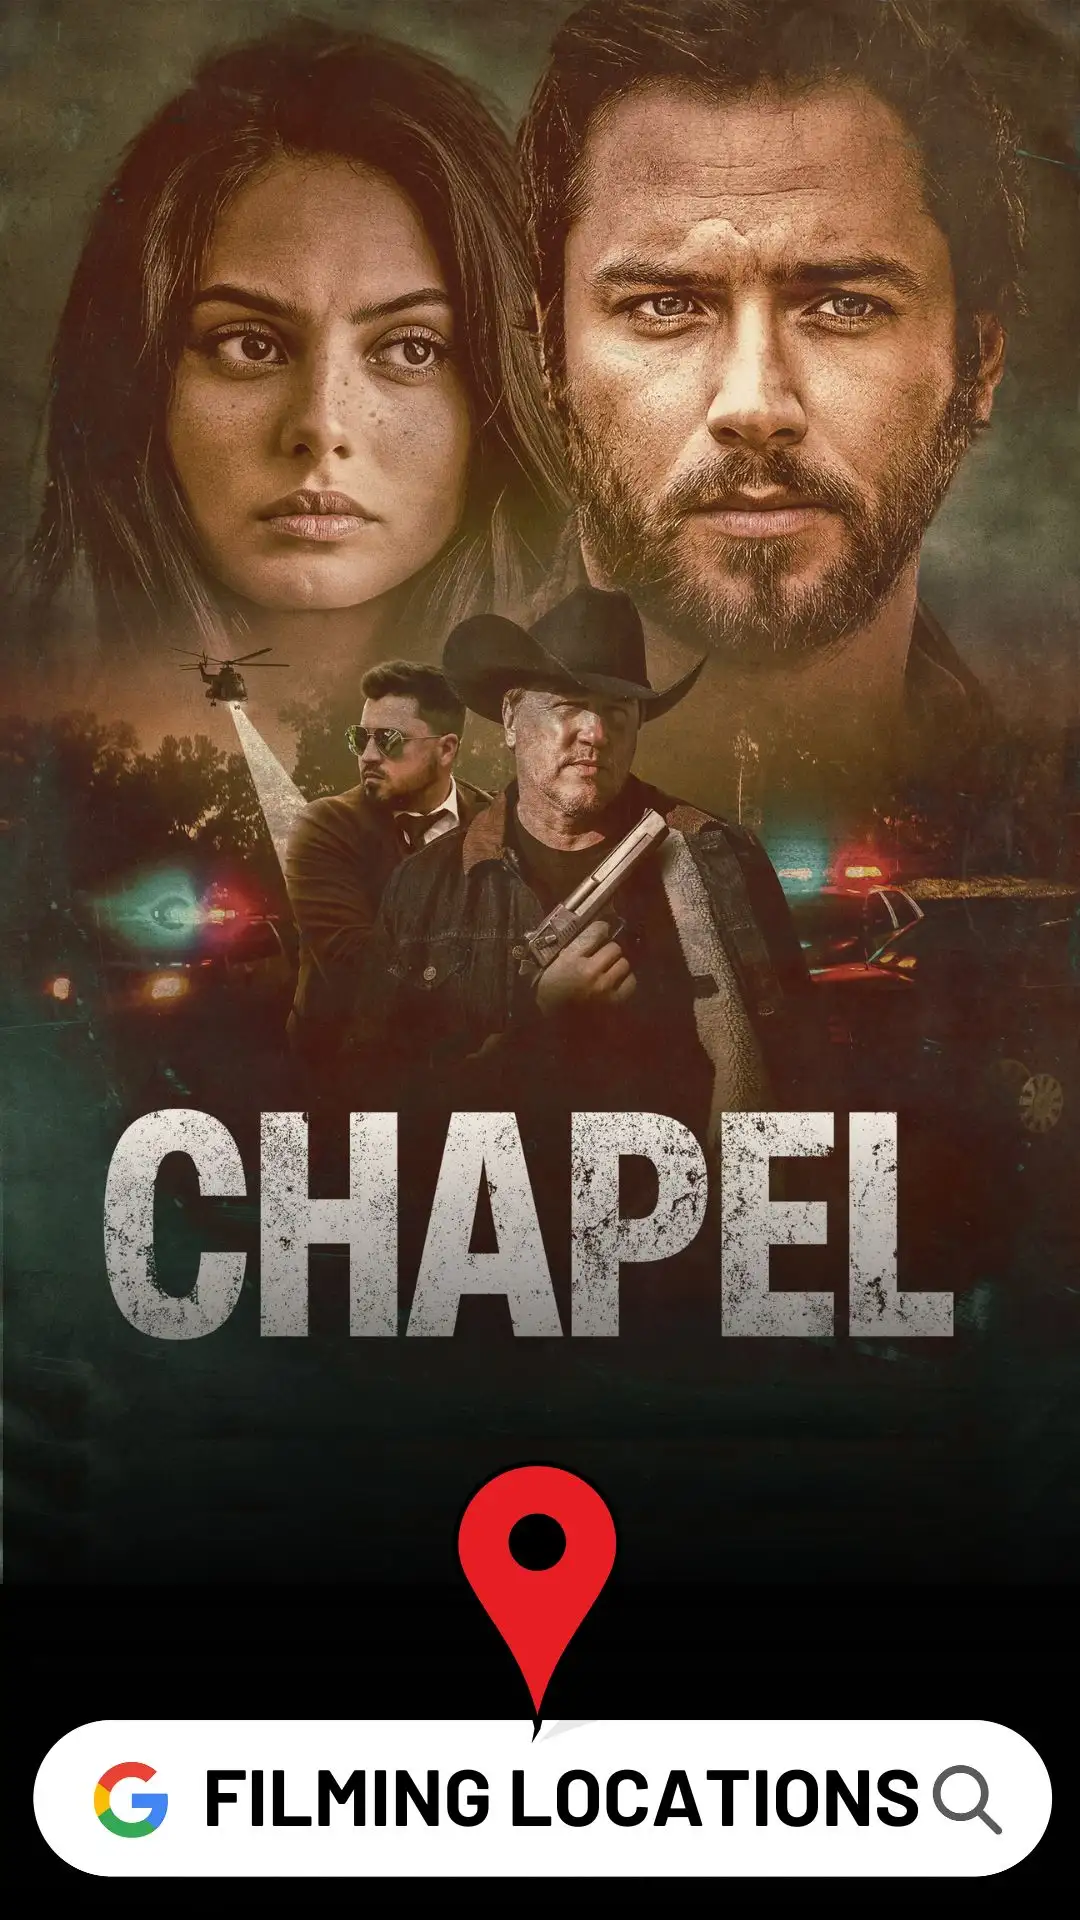 Chapel Filming Locations and BTS